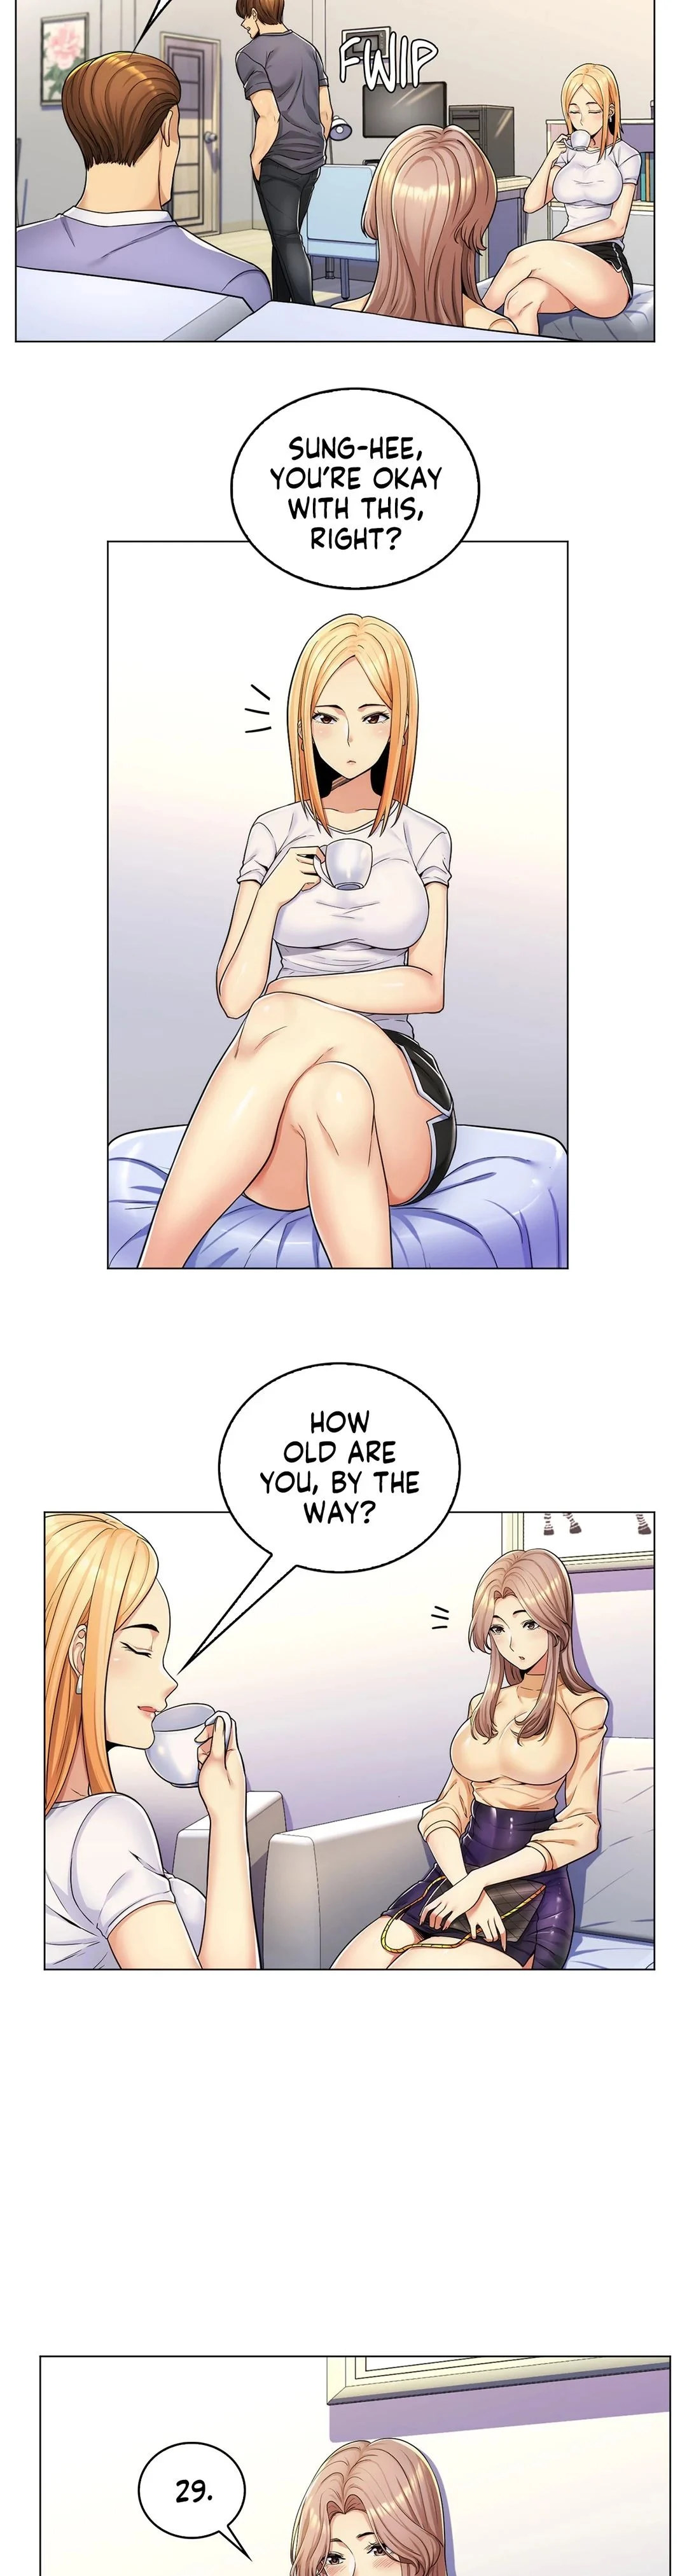 My Girlfriend is My Stepmother - Chapter 1 Page 3